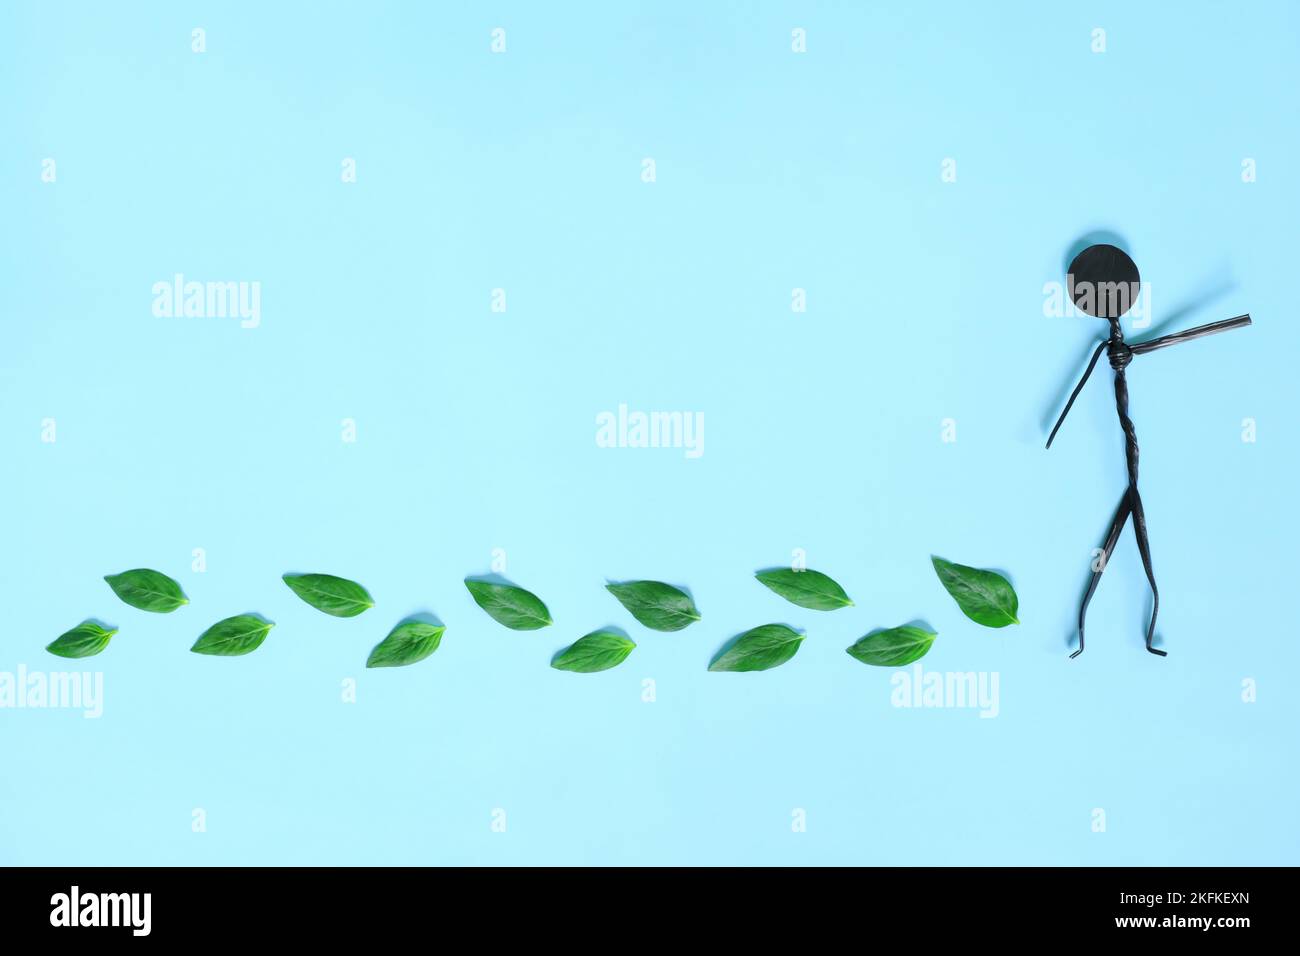 Environment friendly, sustainable, ecological lifestyle living and carbon footprint reduction concept. Stick figure man with fresh green leaves Stock Photo